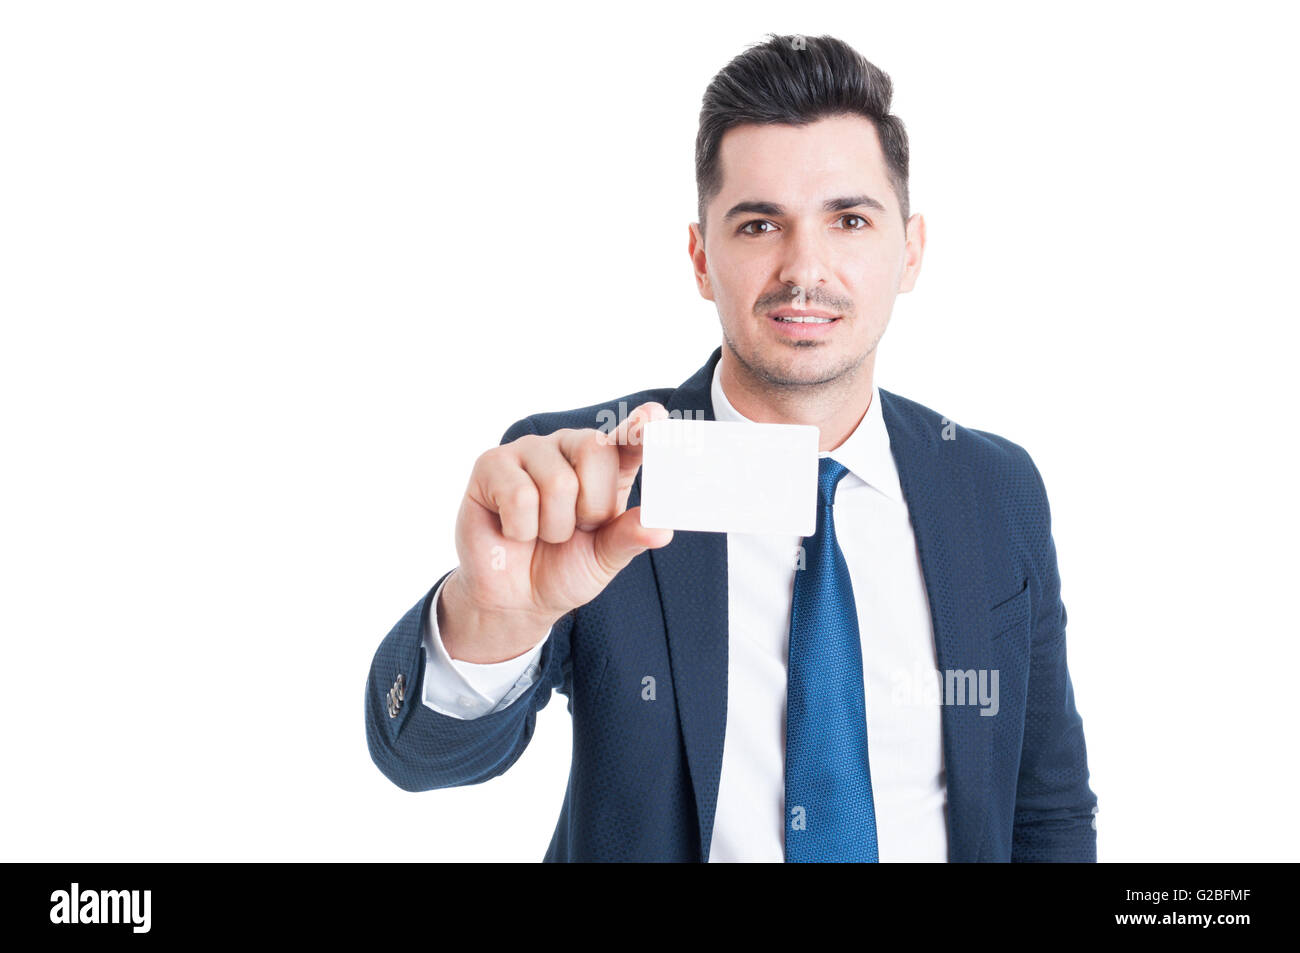 Portrait of young businessman holding sa carte blanche avec zone publicitaire isolated on white Banque D'Images